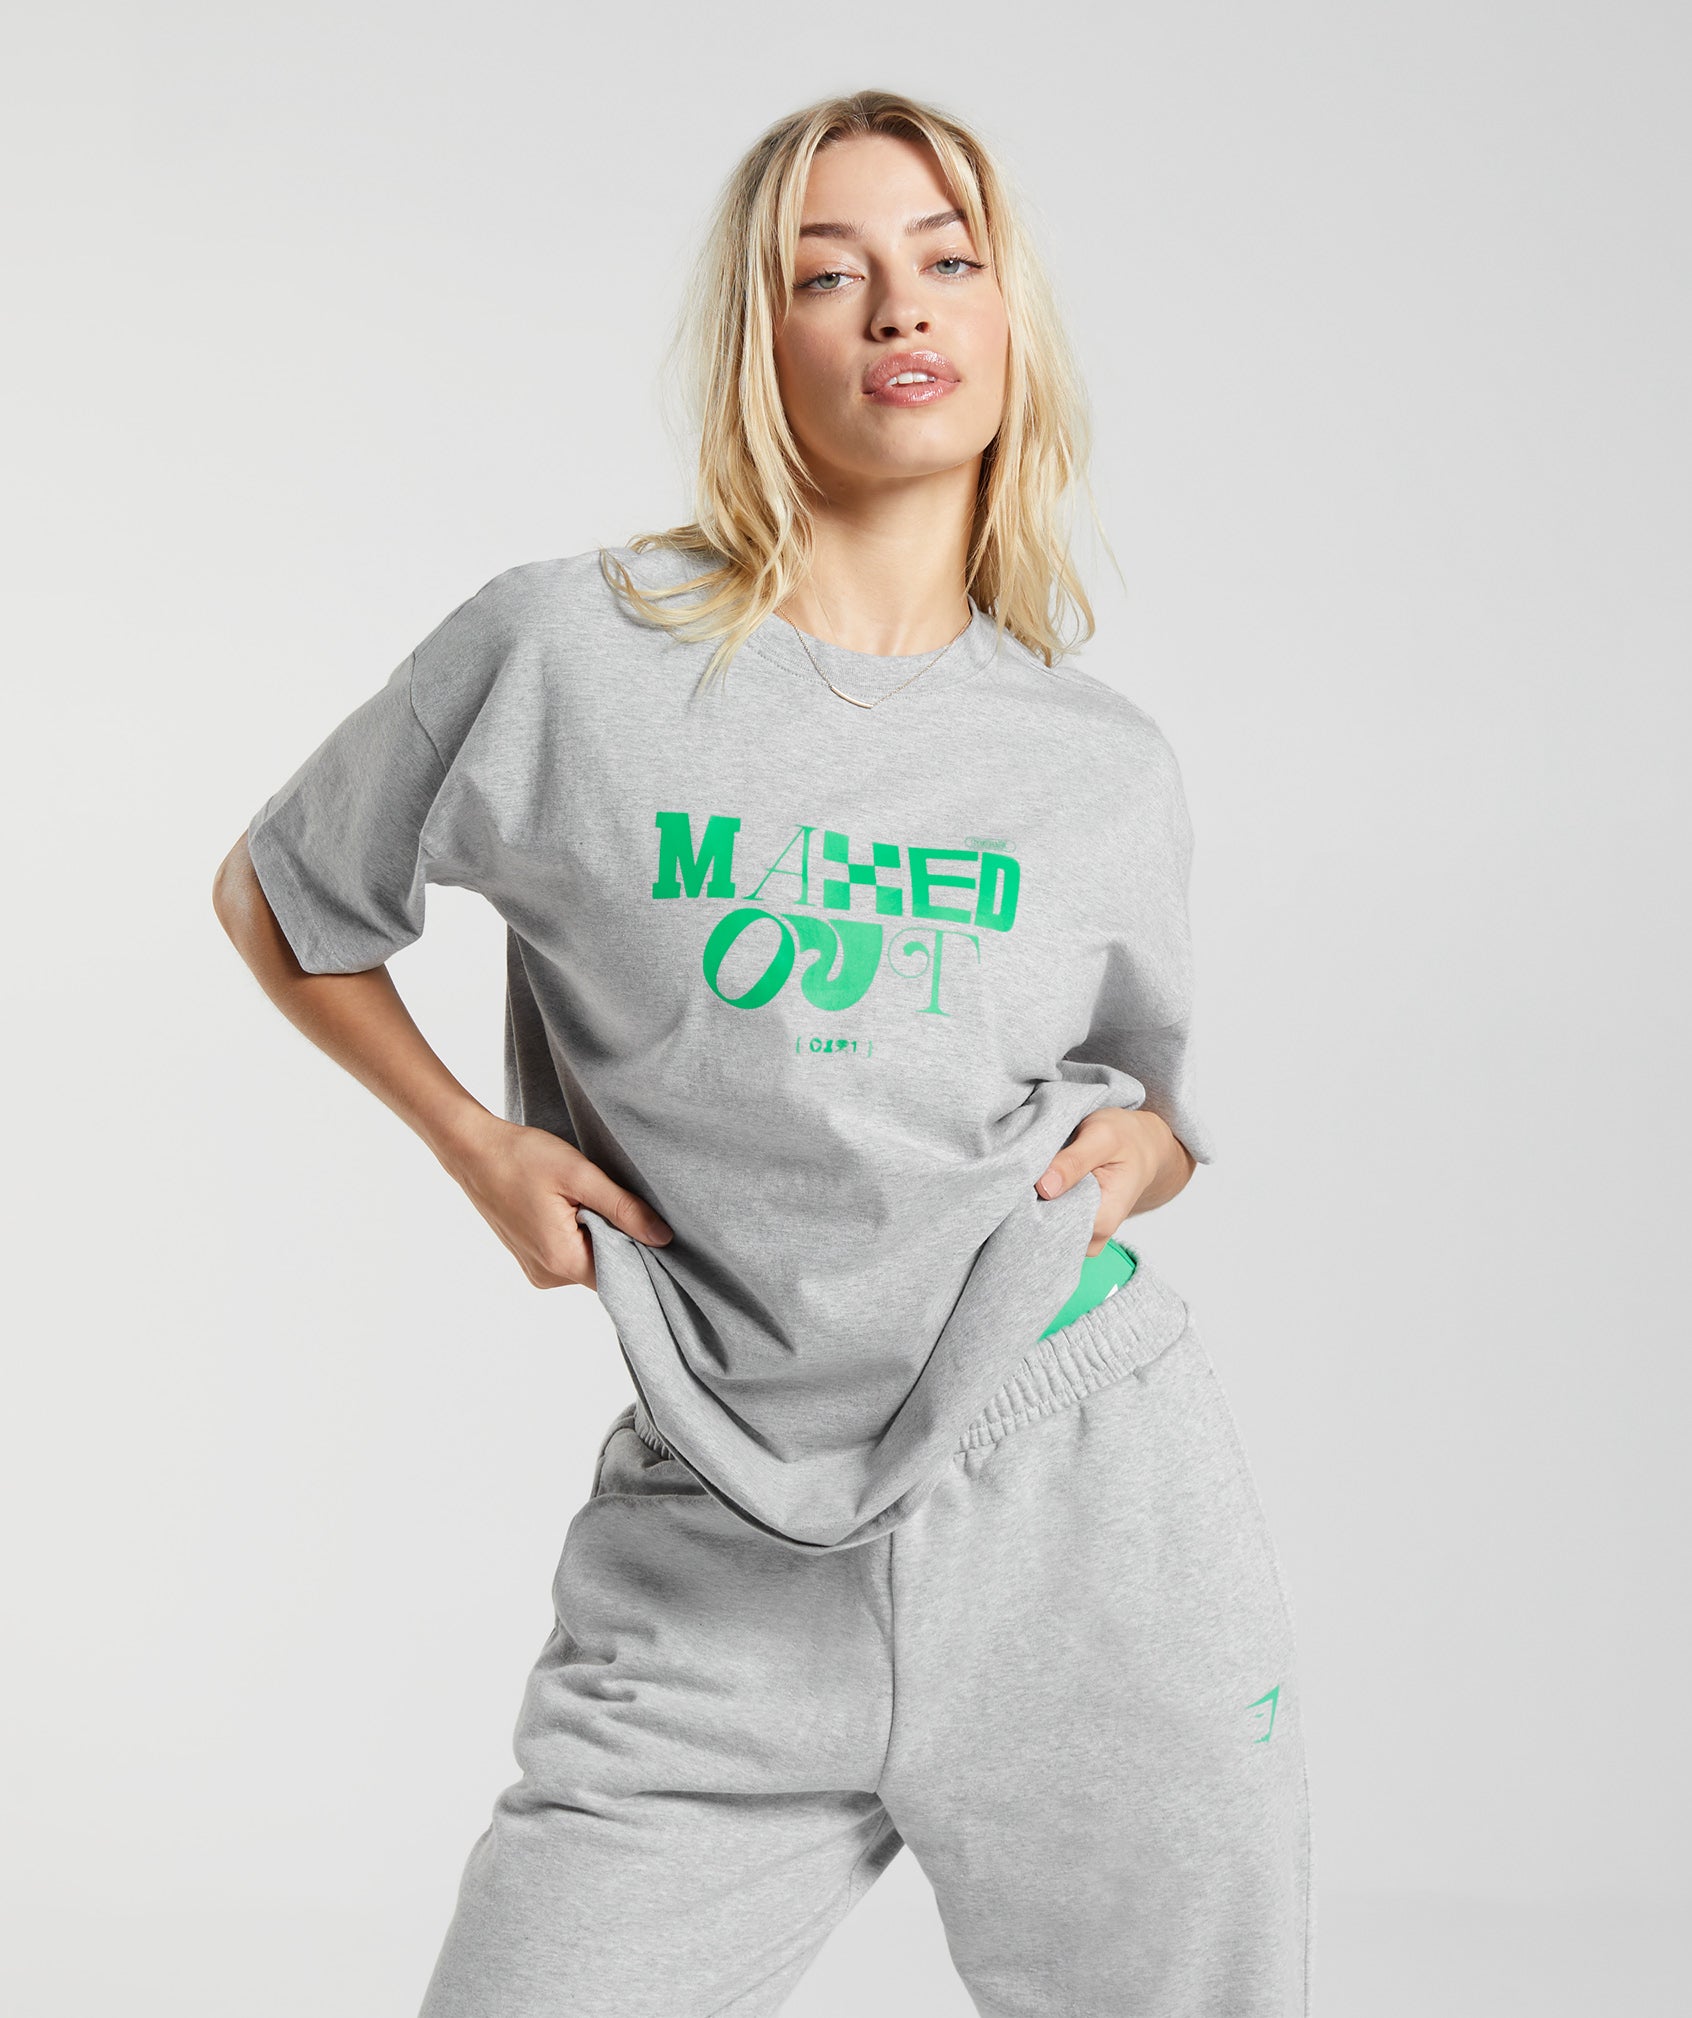 Maxed Out Oversized T-Shirt in Light Grey Marl